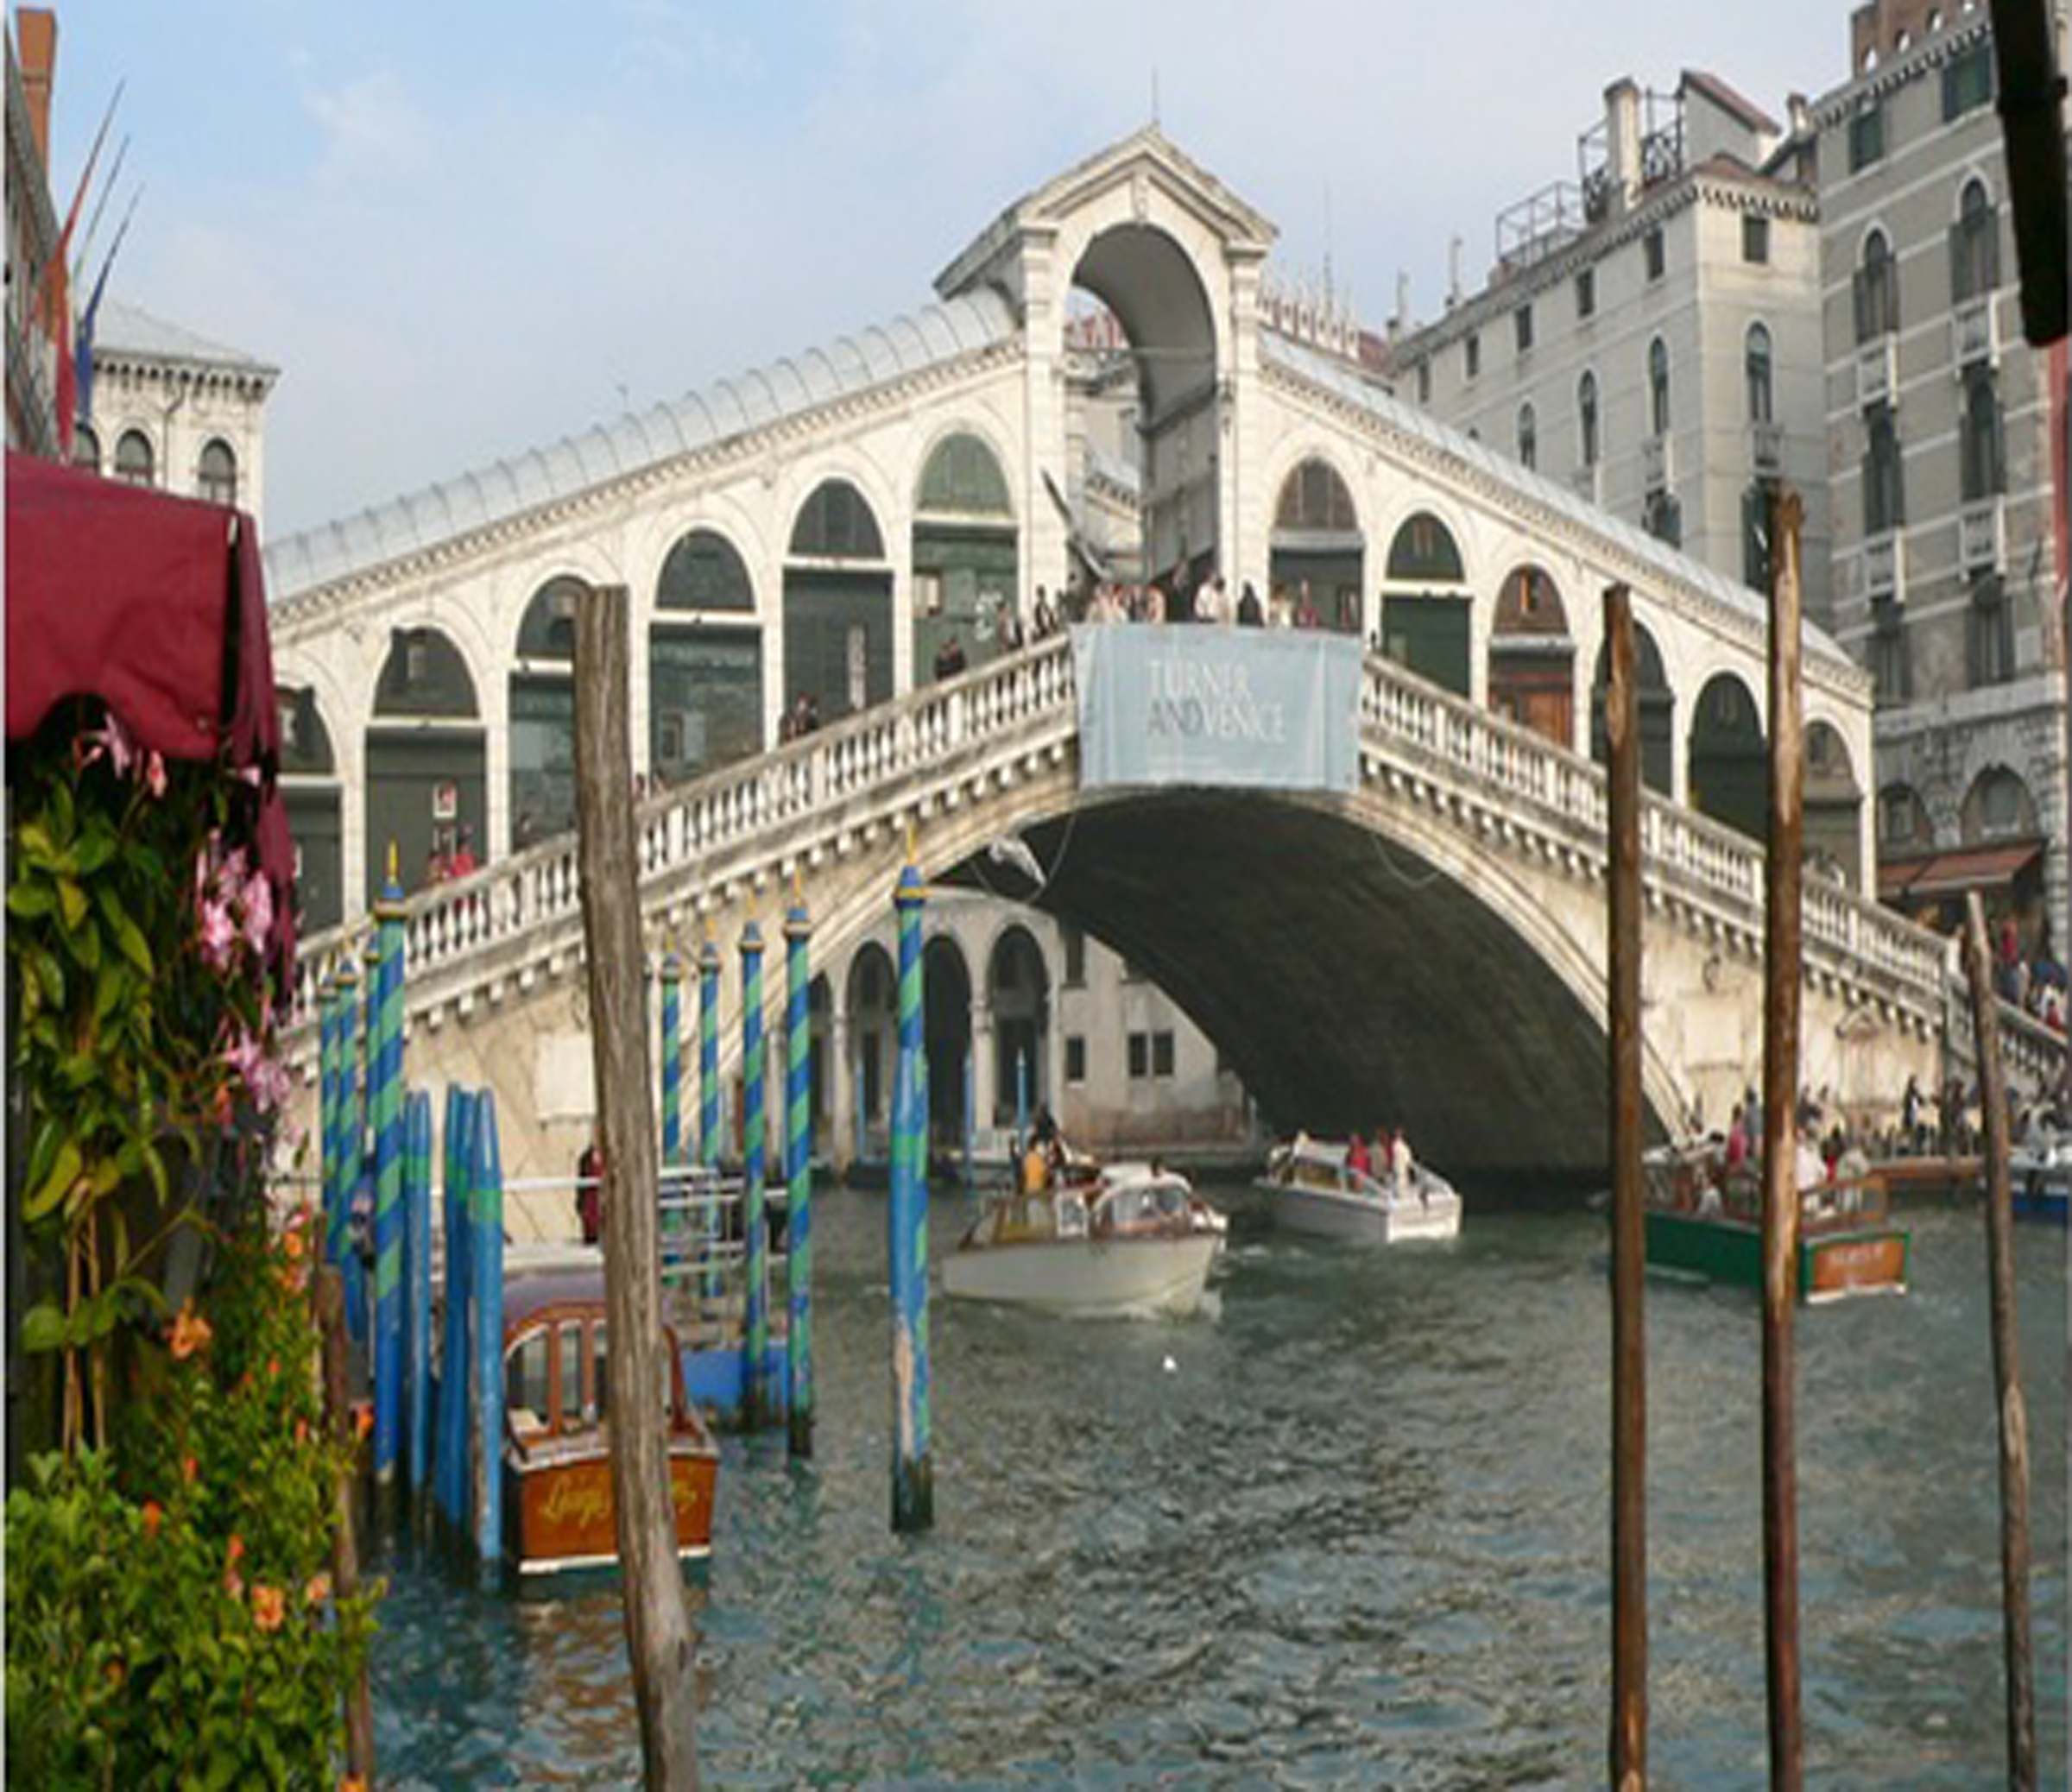 47 Rialto Bridge Drawing Stock Photos HighRes Pictures and Images   Getty Images